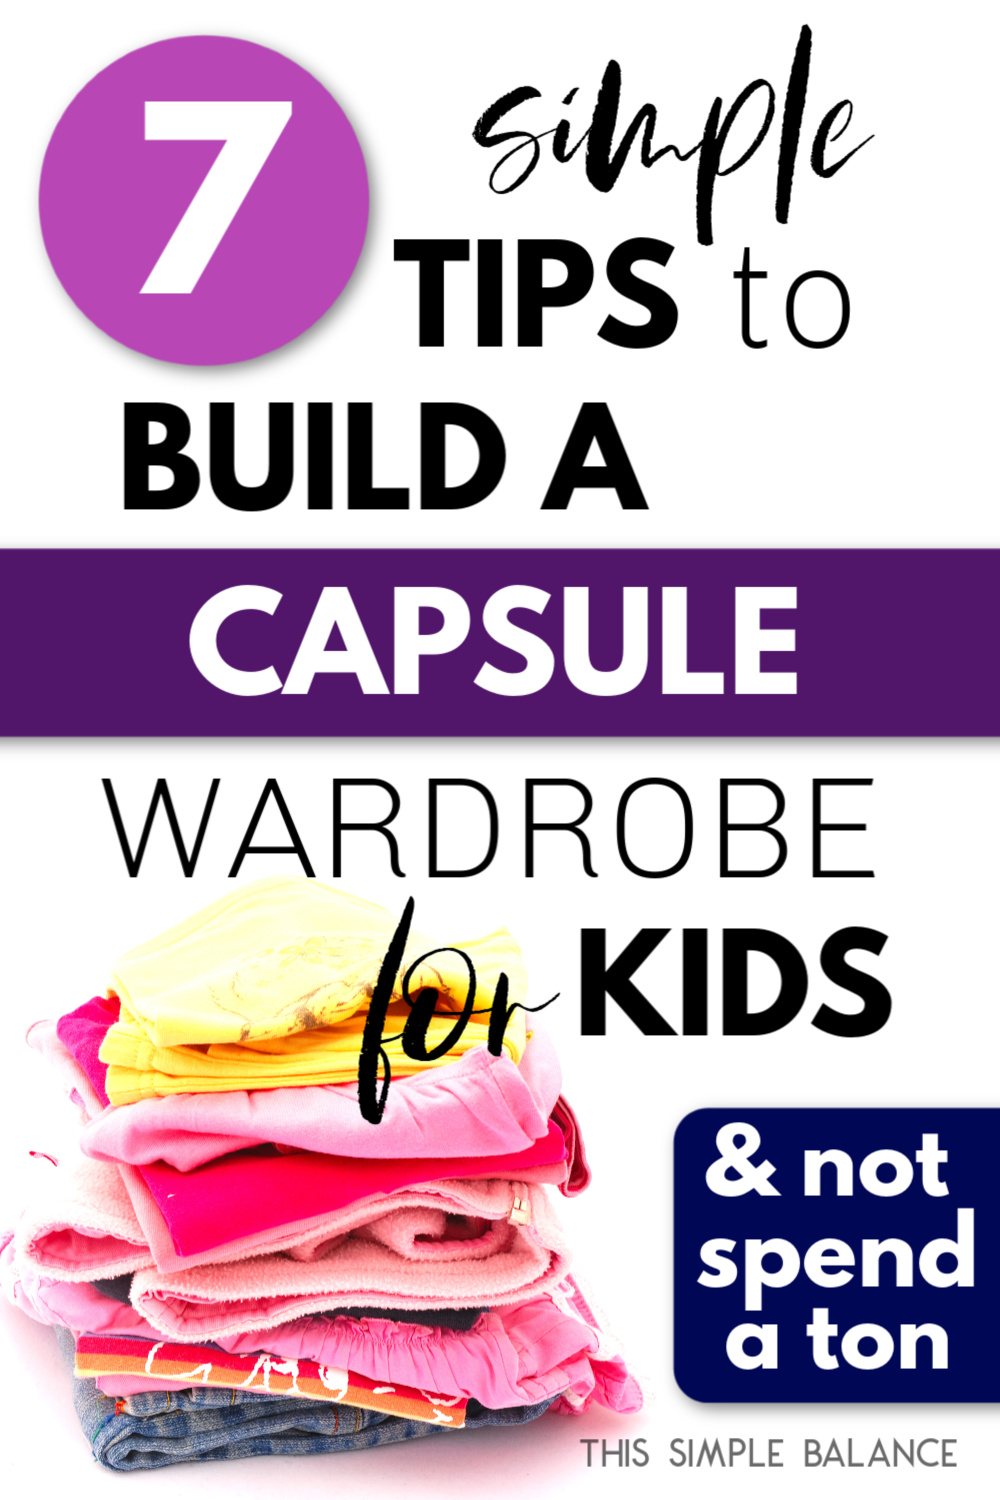 kids' clothing neatly folded and stacked in a pile, with text overlay, "7 simple tips to build a capsule wardrobe for kids & not spend a ton"